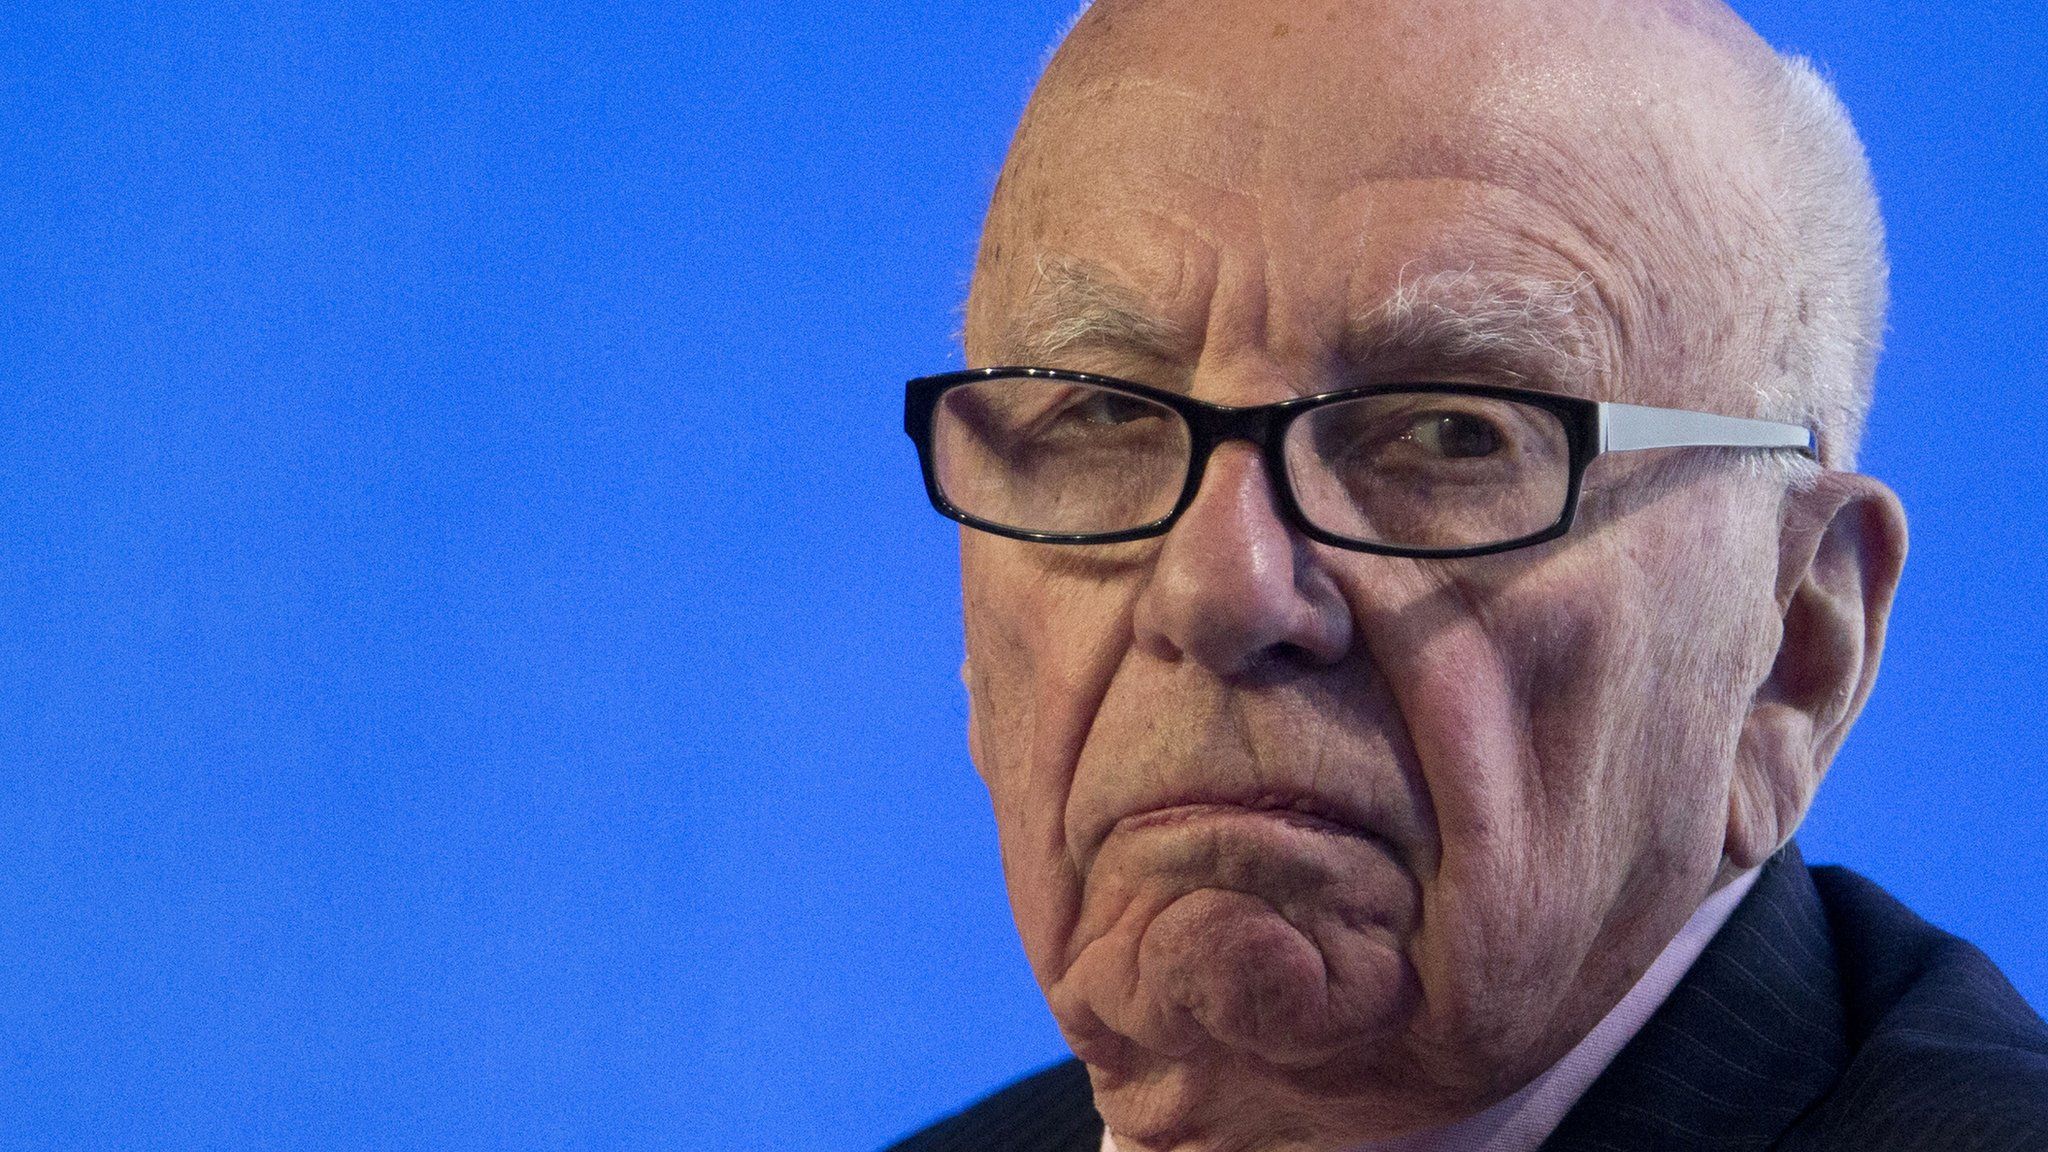 Rupert Murdoch, Executive Chairman News Corporation looks on during a panel discussion at the B20 meeting of company CEO's on July 17, 2014 in Sydney